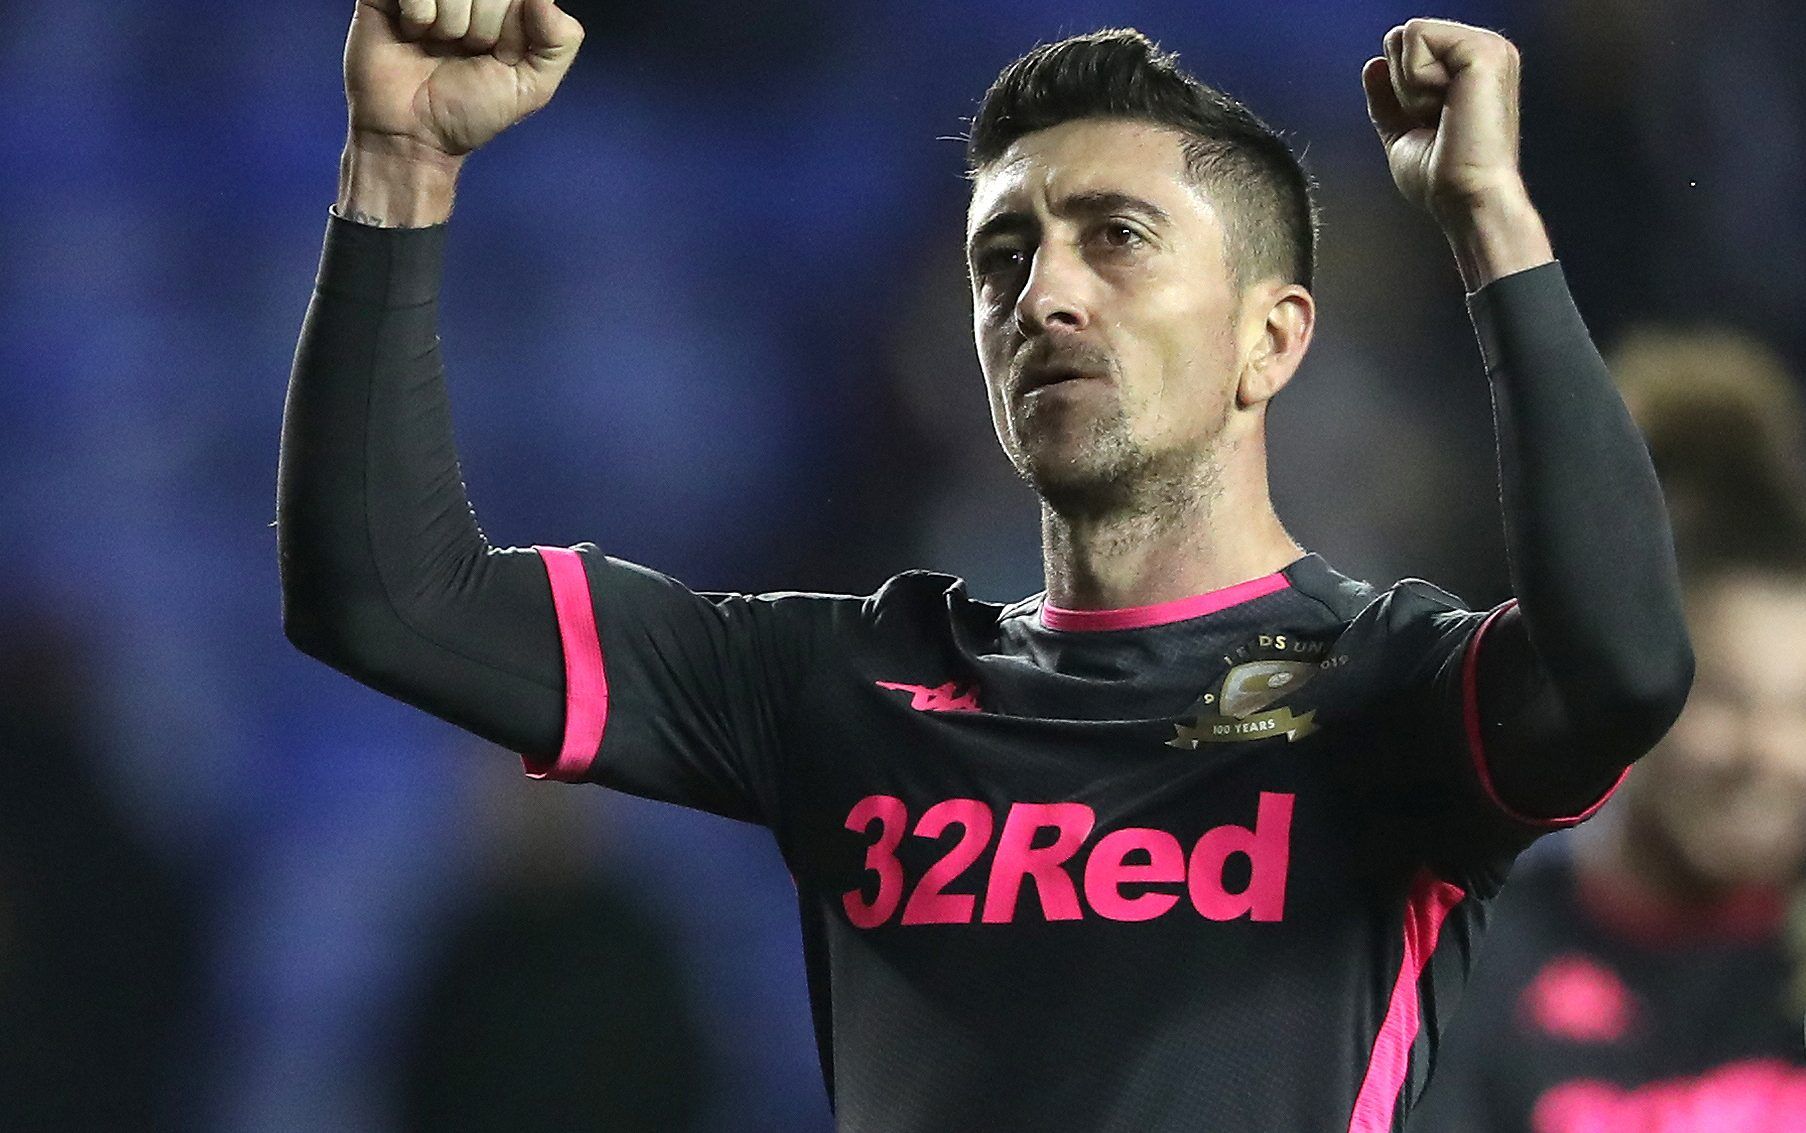 Soccer Football - Championship - Reading v Leeds United - Madejski Stadium, Reading, Britain - November 26, 2019   Leeds United's Pablo Hernandez celebrates after the match     Action Images/Molly Darlington    EDITORIAL USE ONLY. No use with unauthorized audio, video, data, fixture lists, club/league logos or 